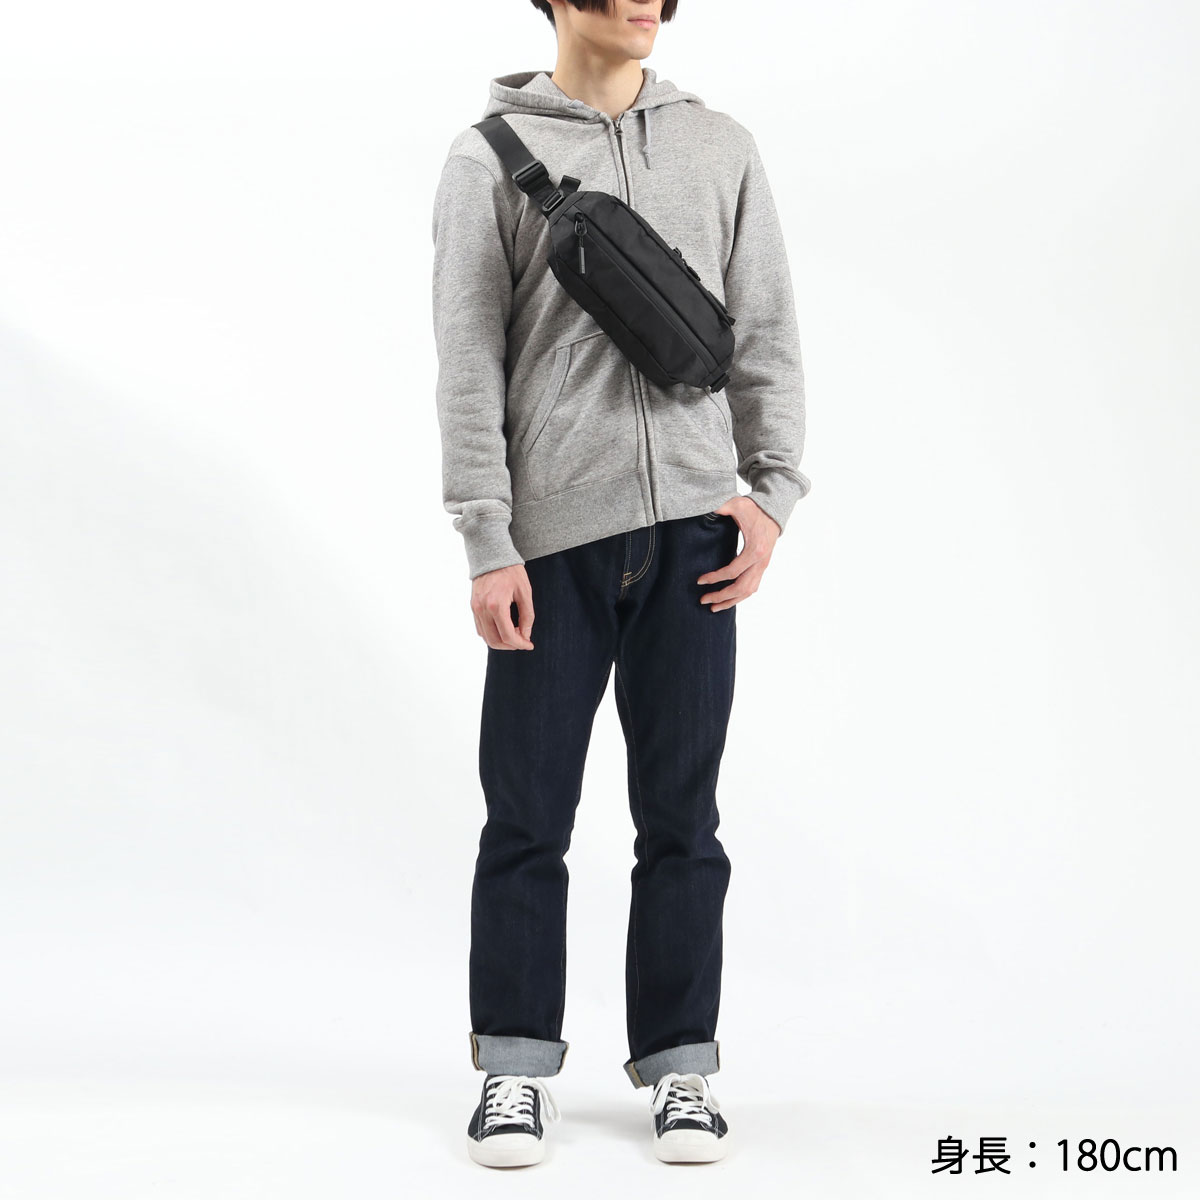 Aer エアー City Collection City Sling 2 X Pac ボディバッグ 2.5L